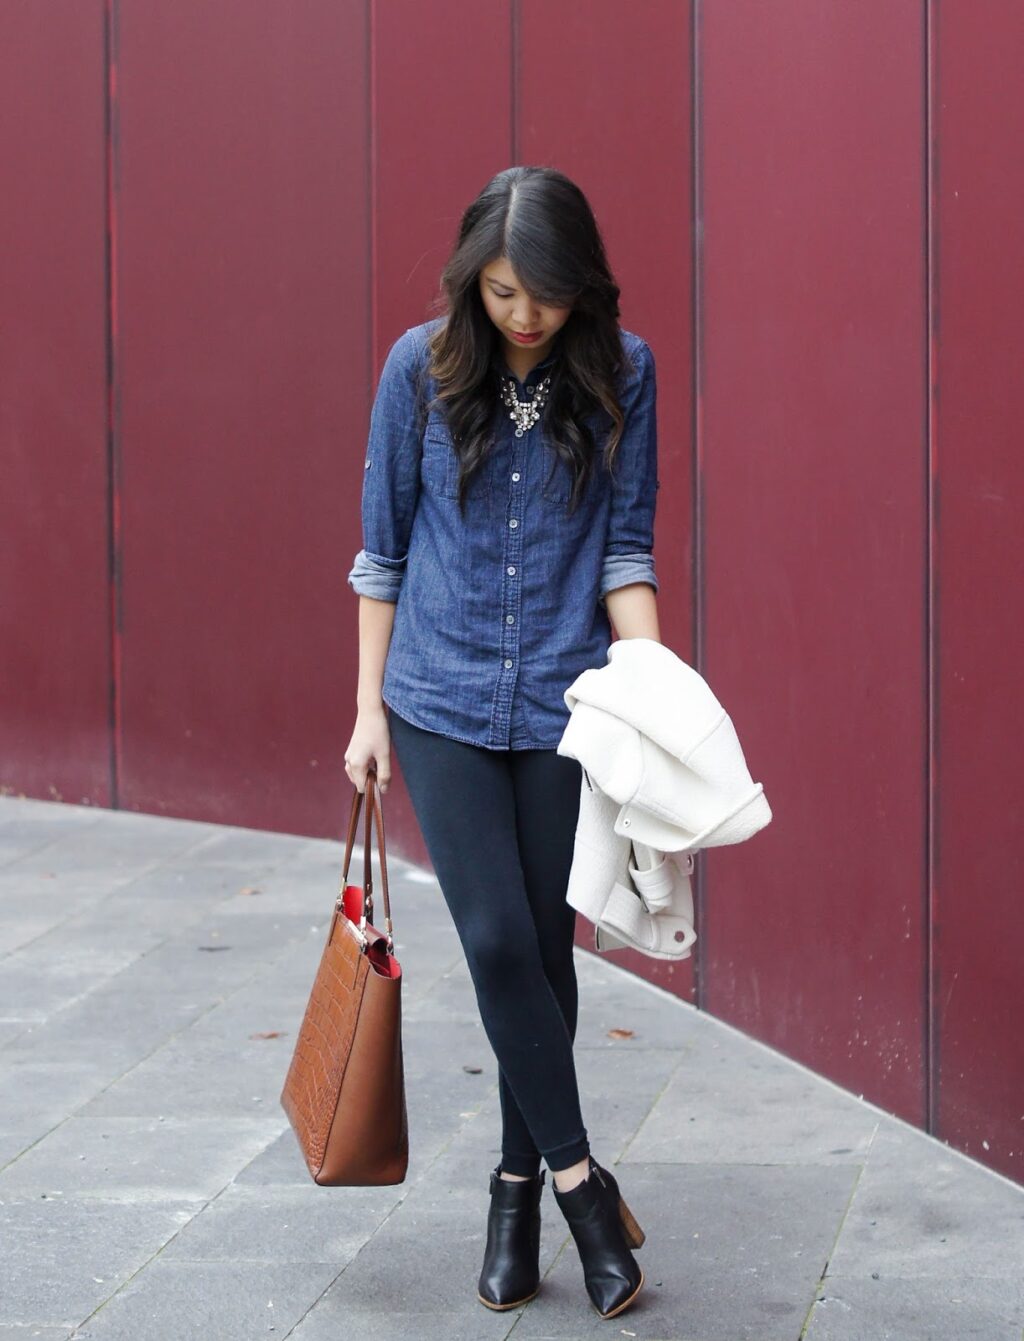 Fashion Recommendations: What kind of pants should you wear with a denim  shirt? - Quora